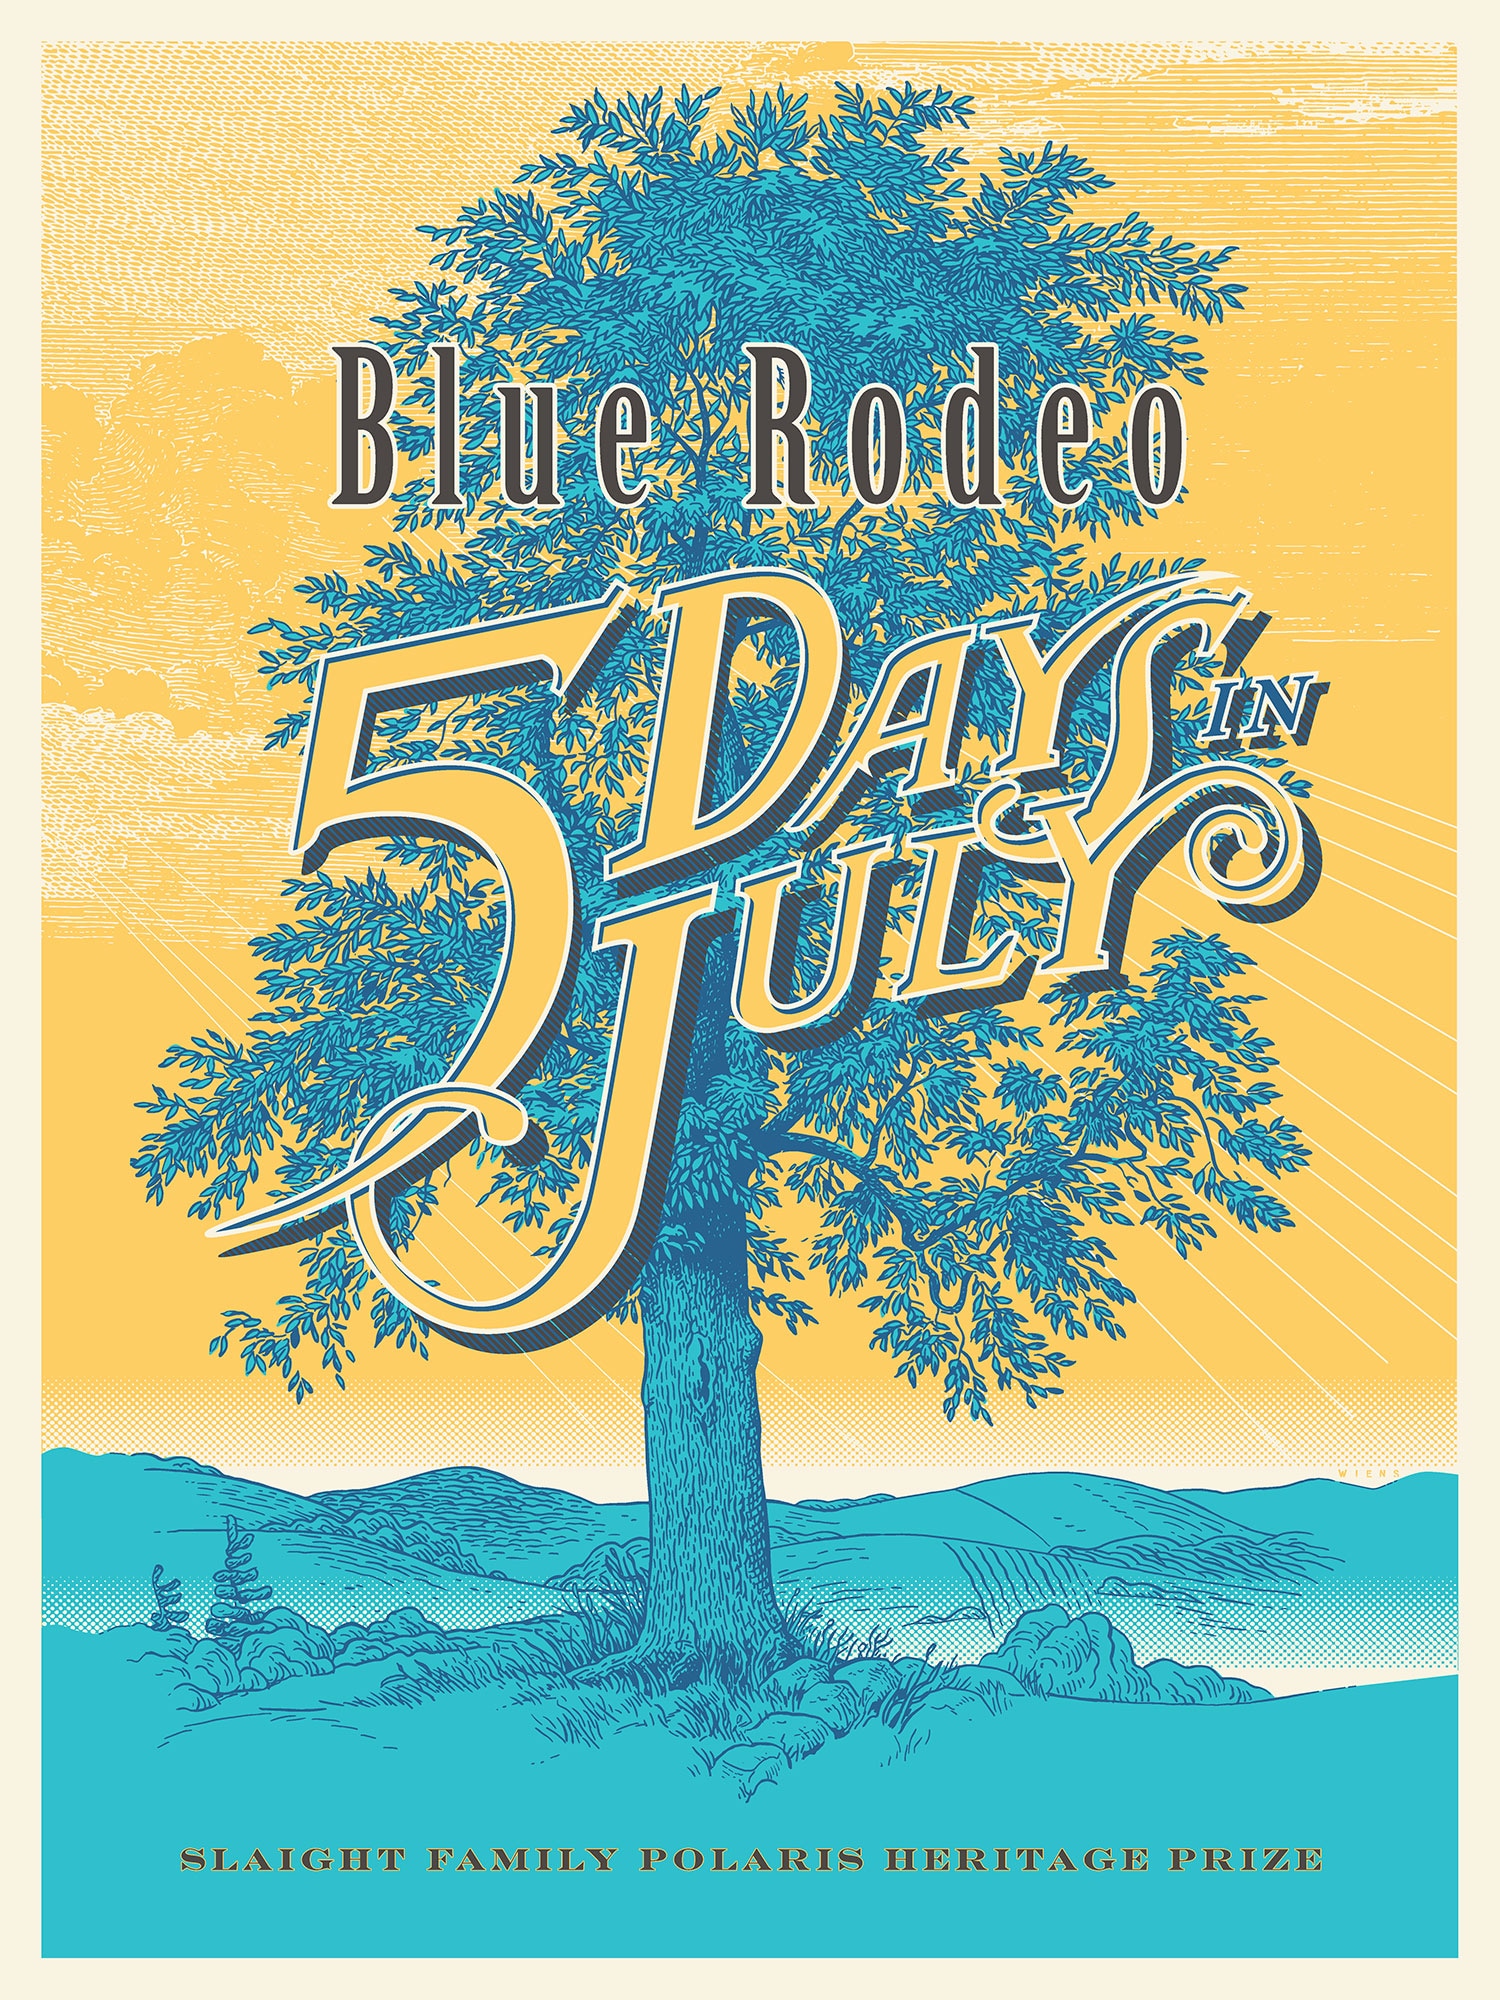  Illustrated poster showing a blue, leafy tree in the centre. The sky is bright yellow. The words "Blue Rodeo 5 Days in July" are written across the centre.